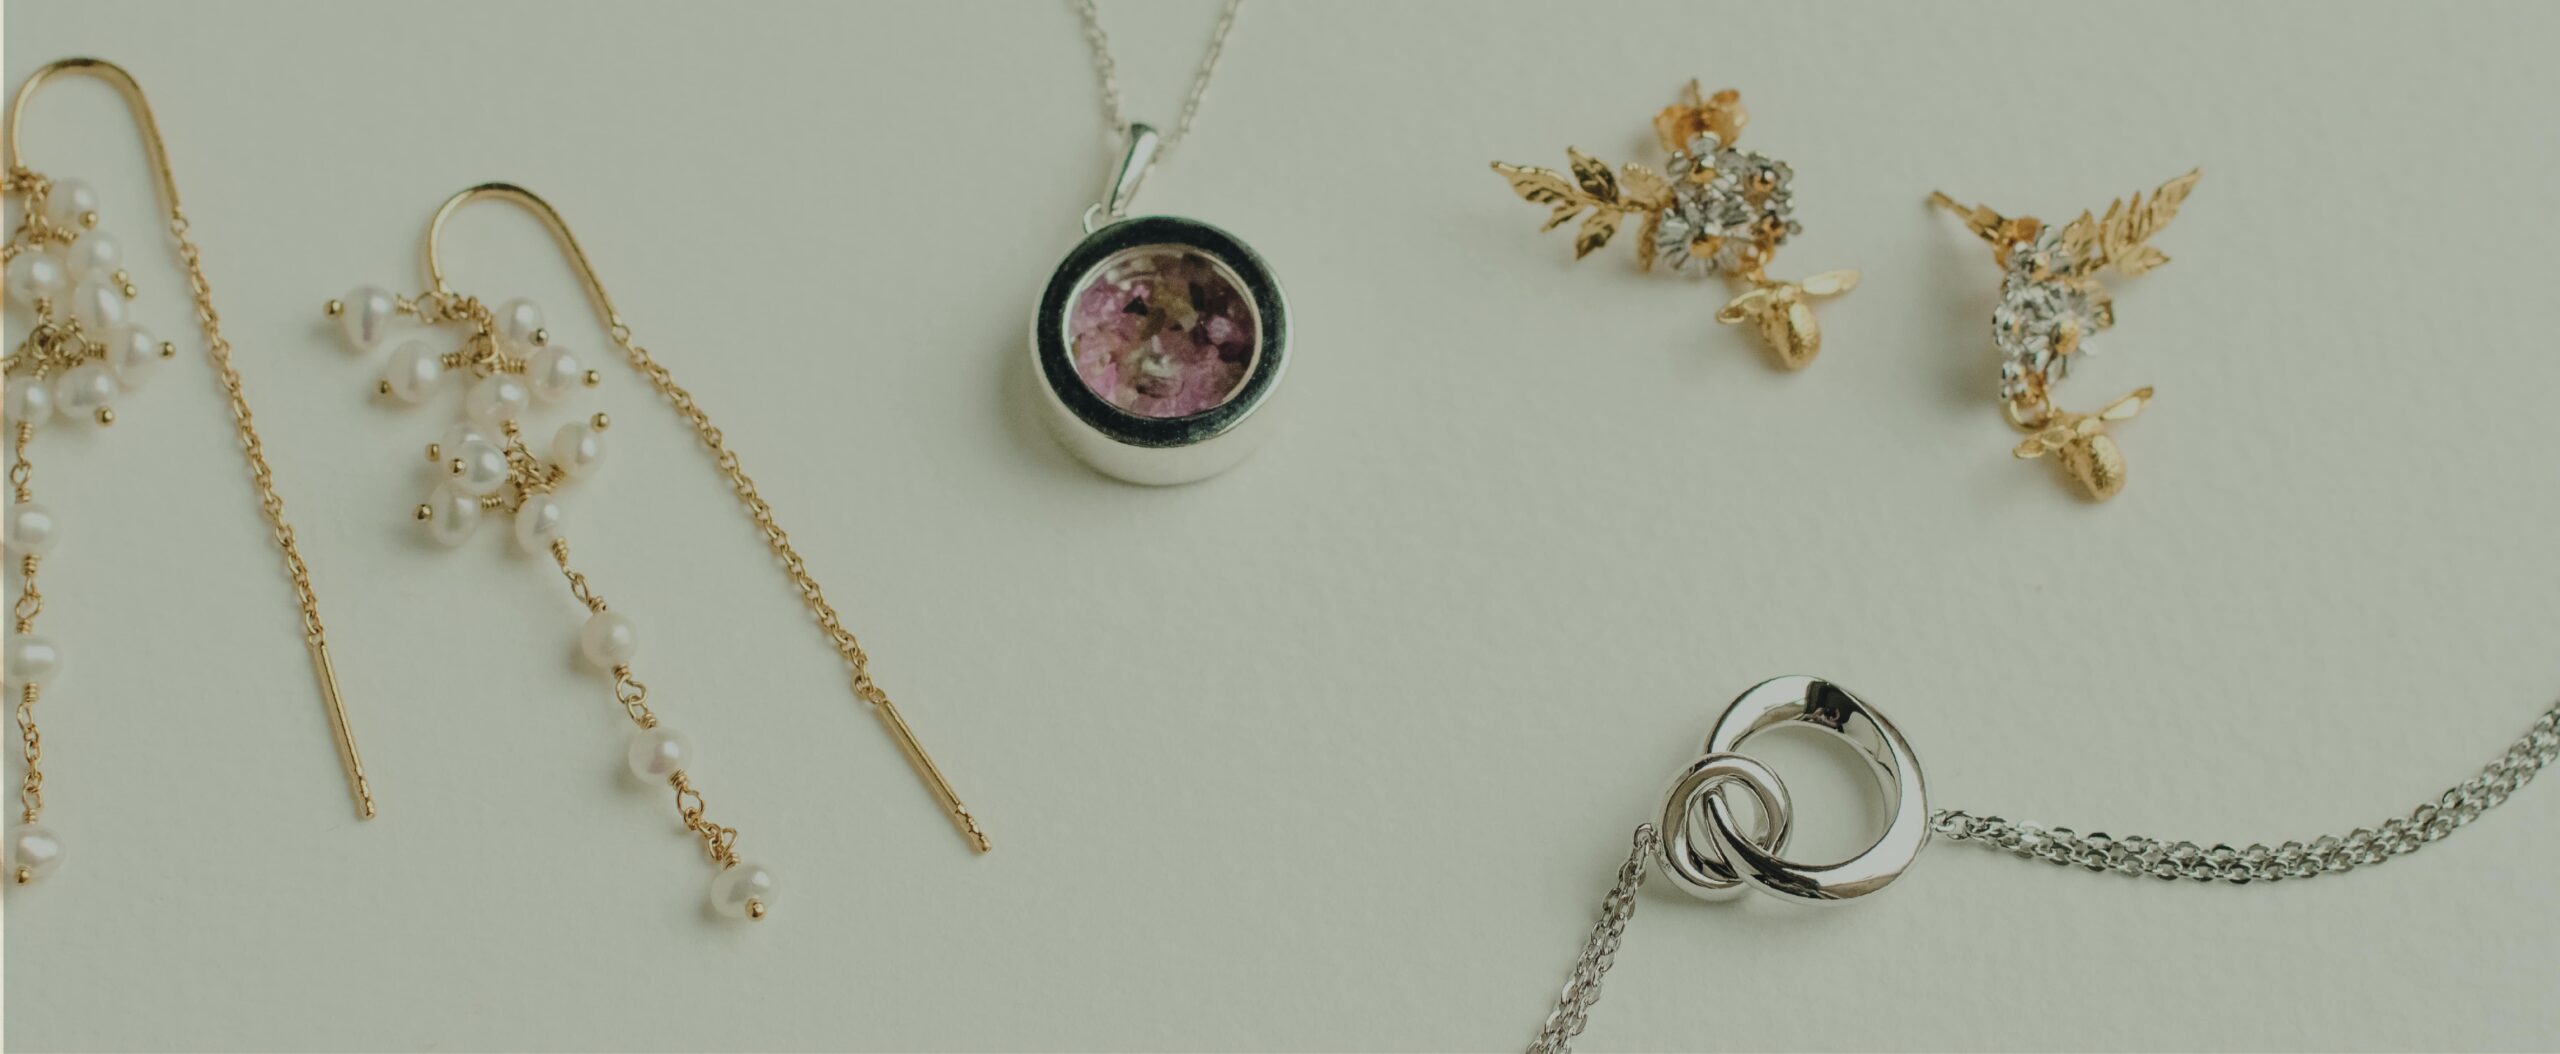 Find an extra special jewellery gift at Silverado Jewellery